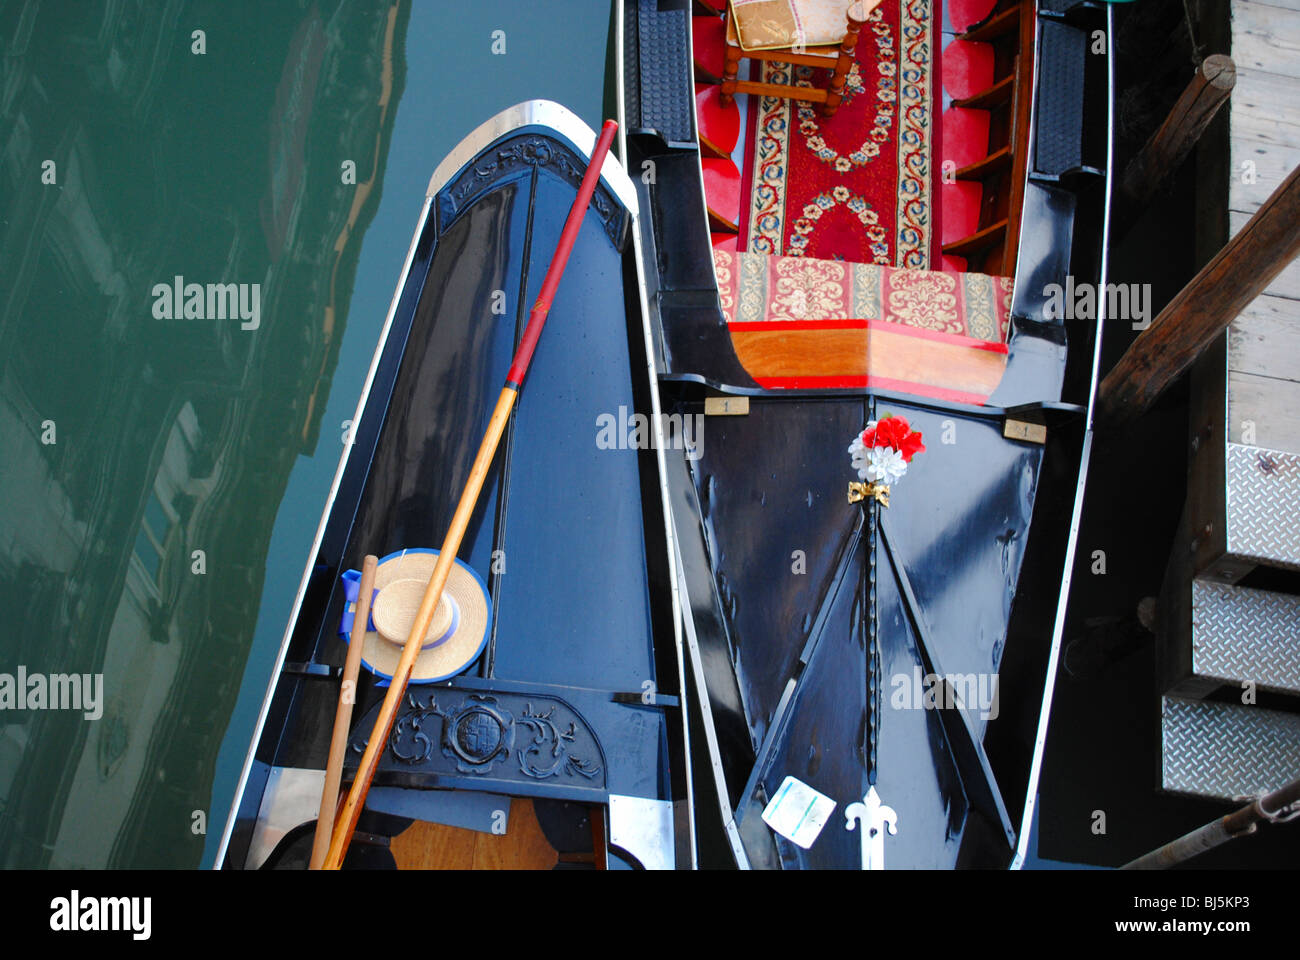 A gondolier's hat and oars lying on board his gondola in a canal in San Lio, Venice, Italy Stock Photo